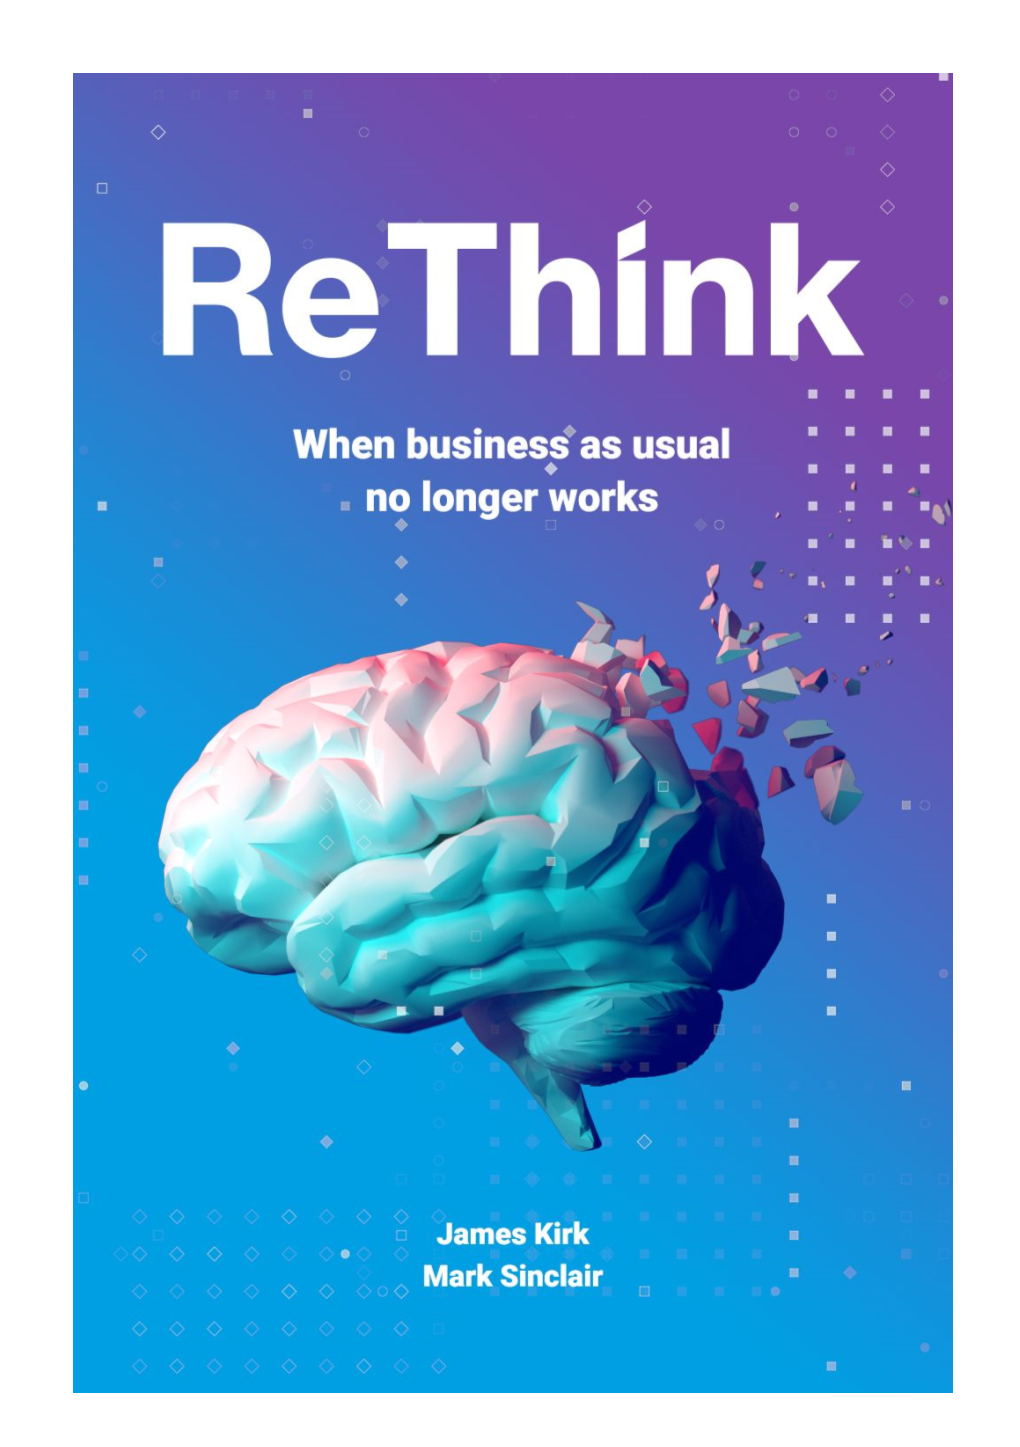 Download the Rethink Book Here